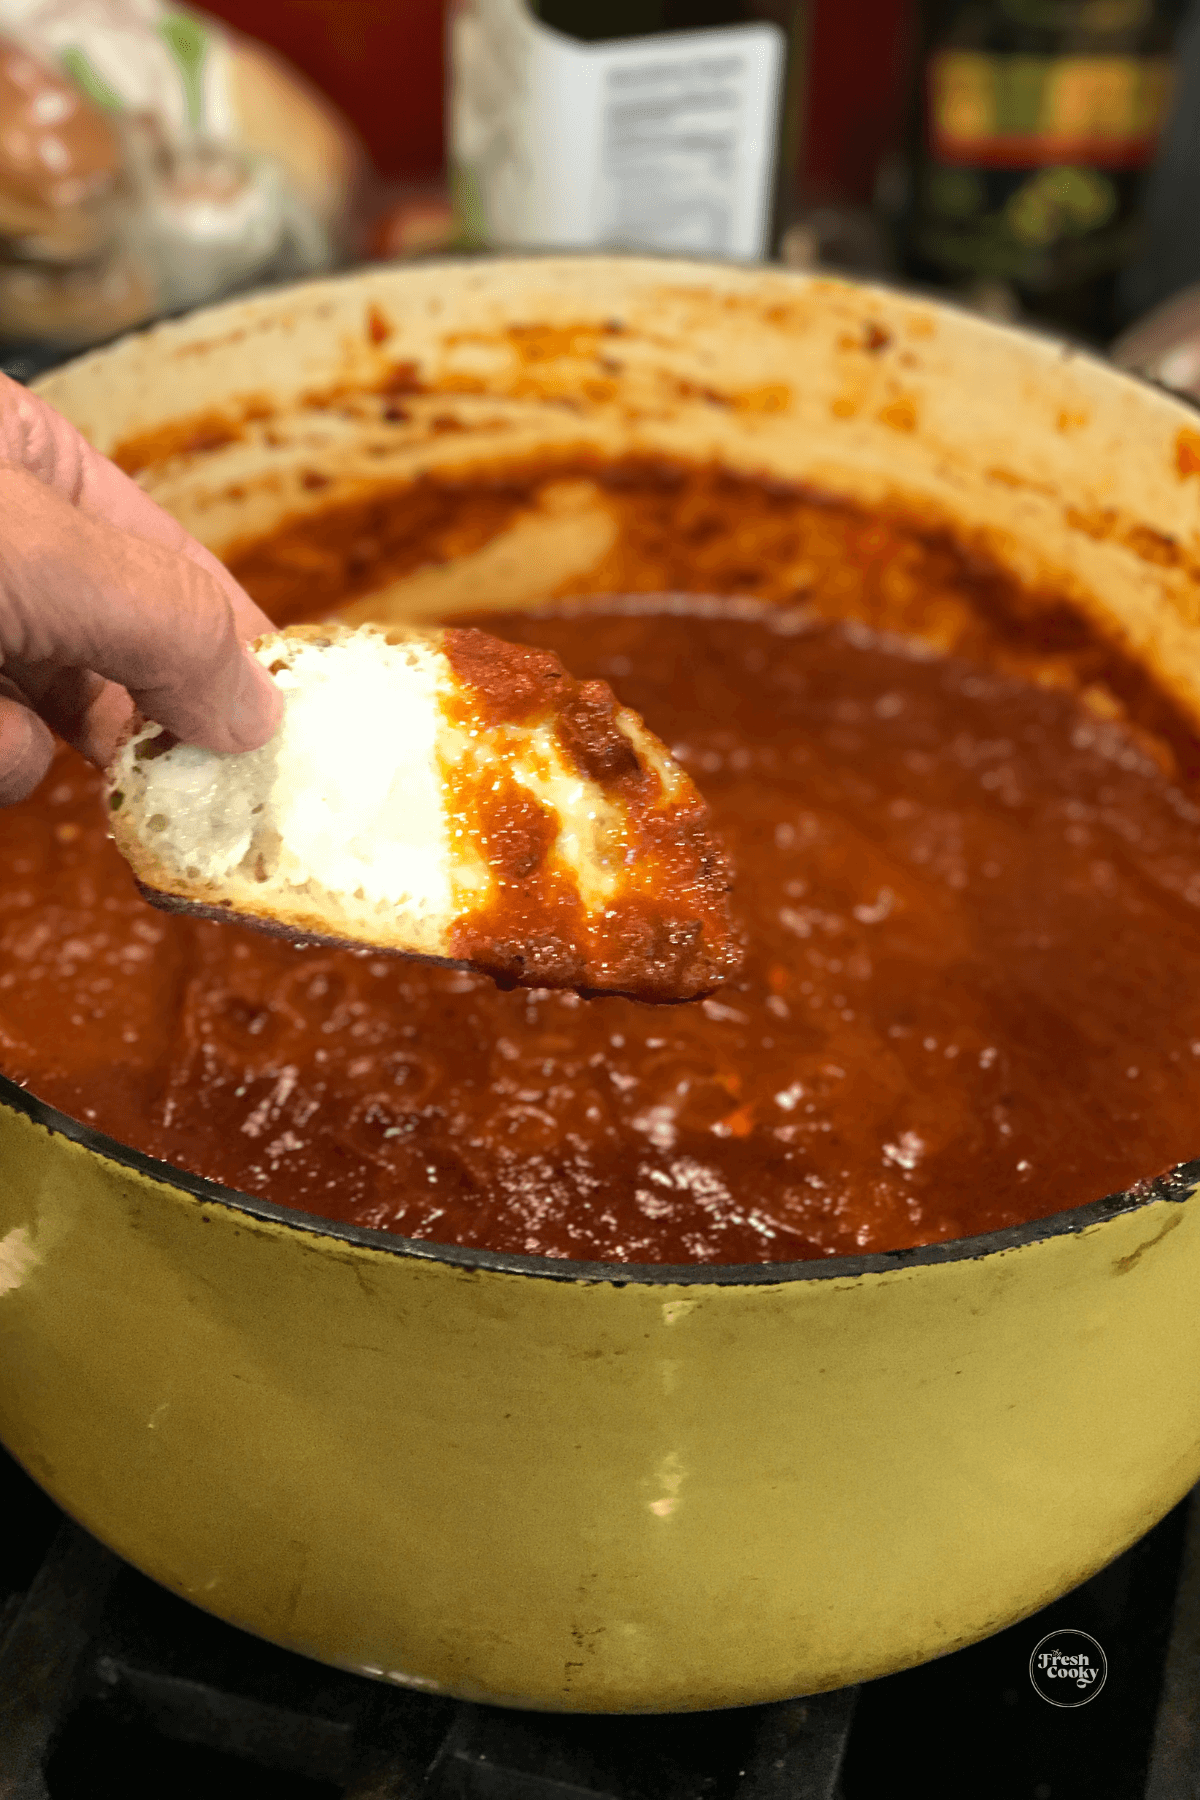 Hand dipping buttered Italian bread in rich, thick pasta sauce.